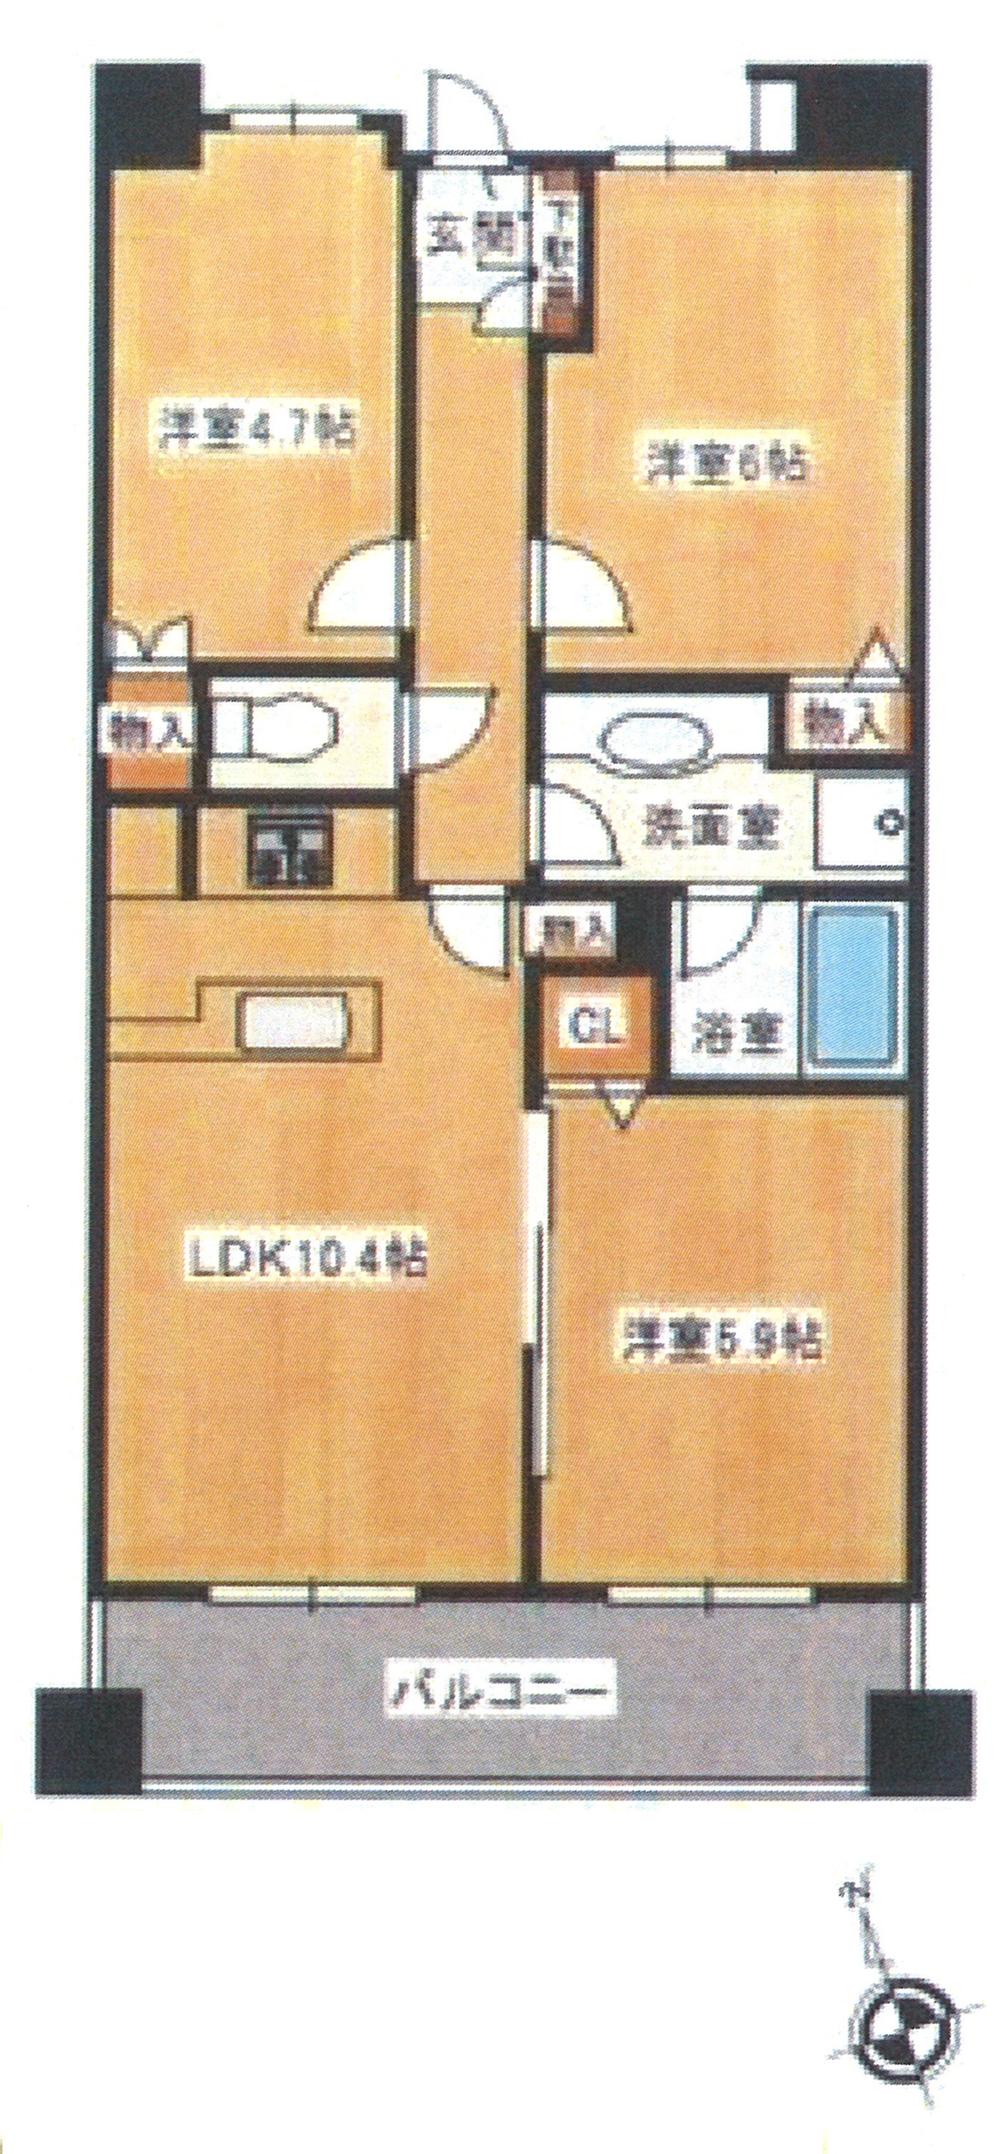 Floor plan. 3LDK, Price 21,800,000 yen, Occupied area 56.76 sq m , Comfortable convenient living in the shared facilities of the balcony area 12 sq m enhancement